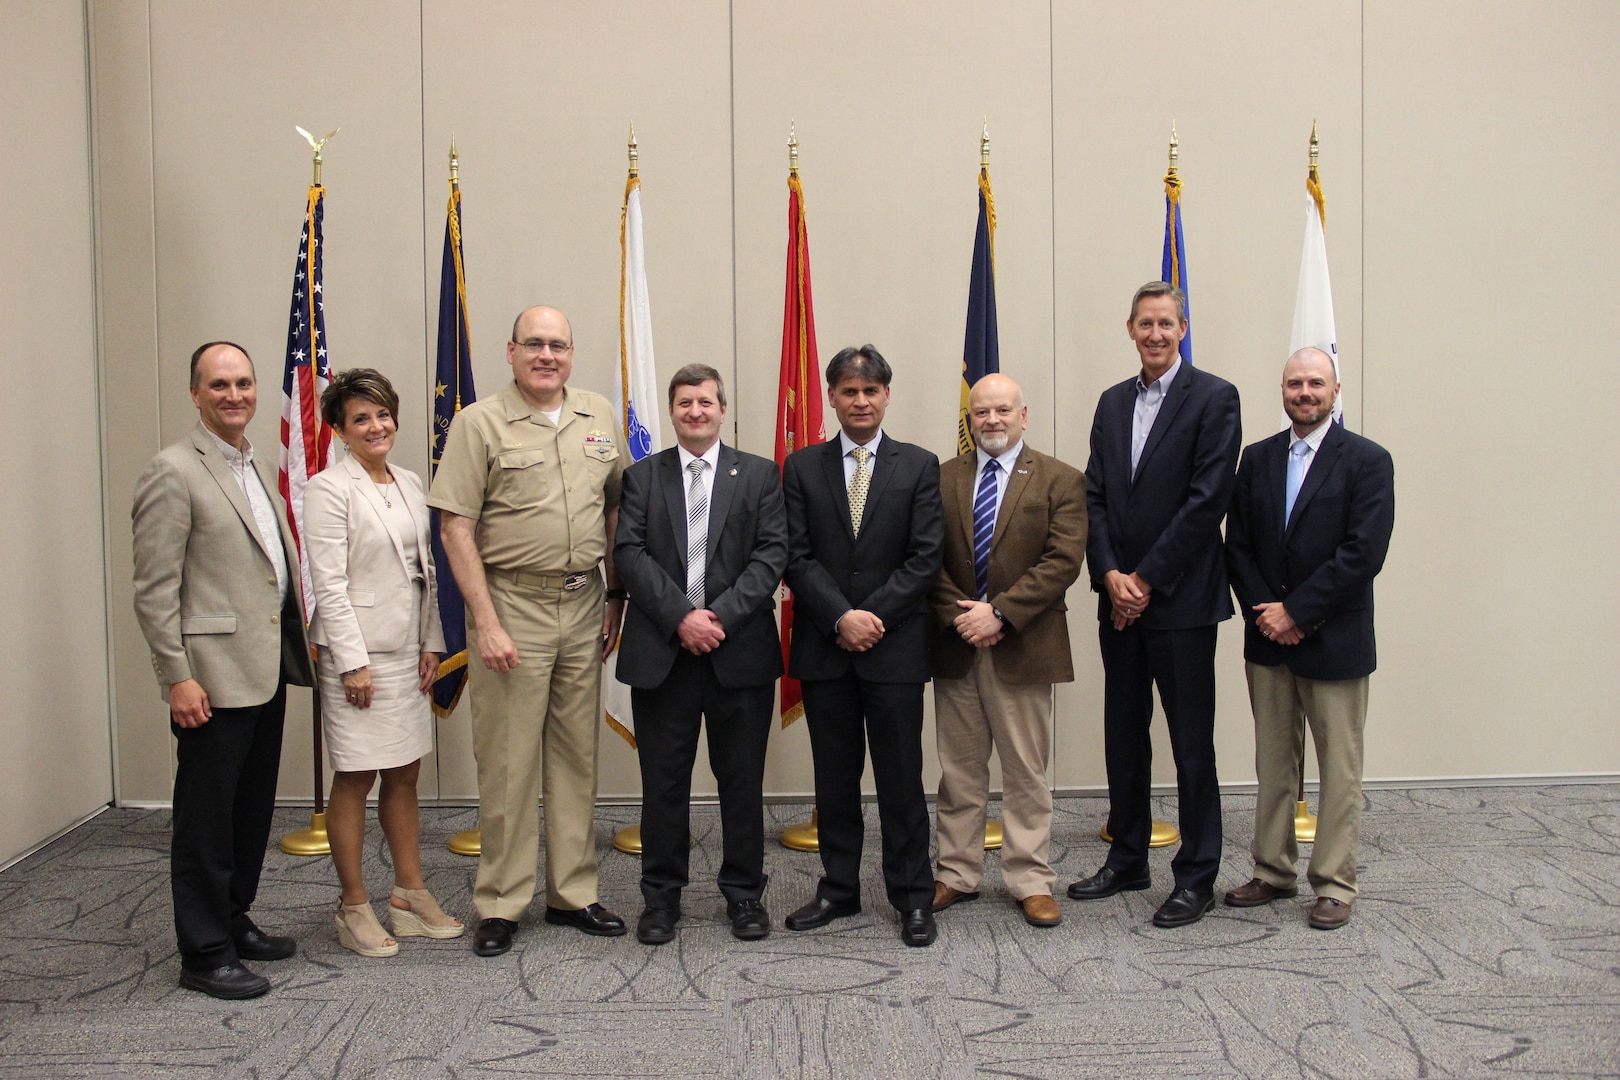 NSWC Crane formally announced its Expeditionary Warfare Systems Engineering Master’s Degree program at a reception on Thursday, May 17th, at the WestGate Academy Conference and Training Center in Crane, Indiana.